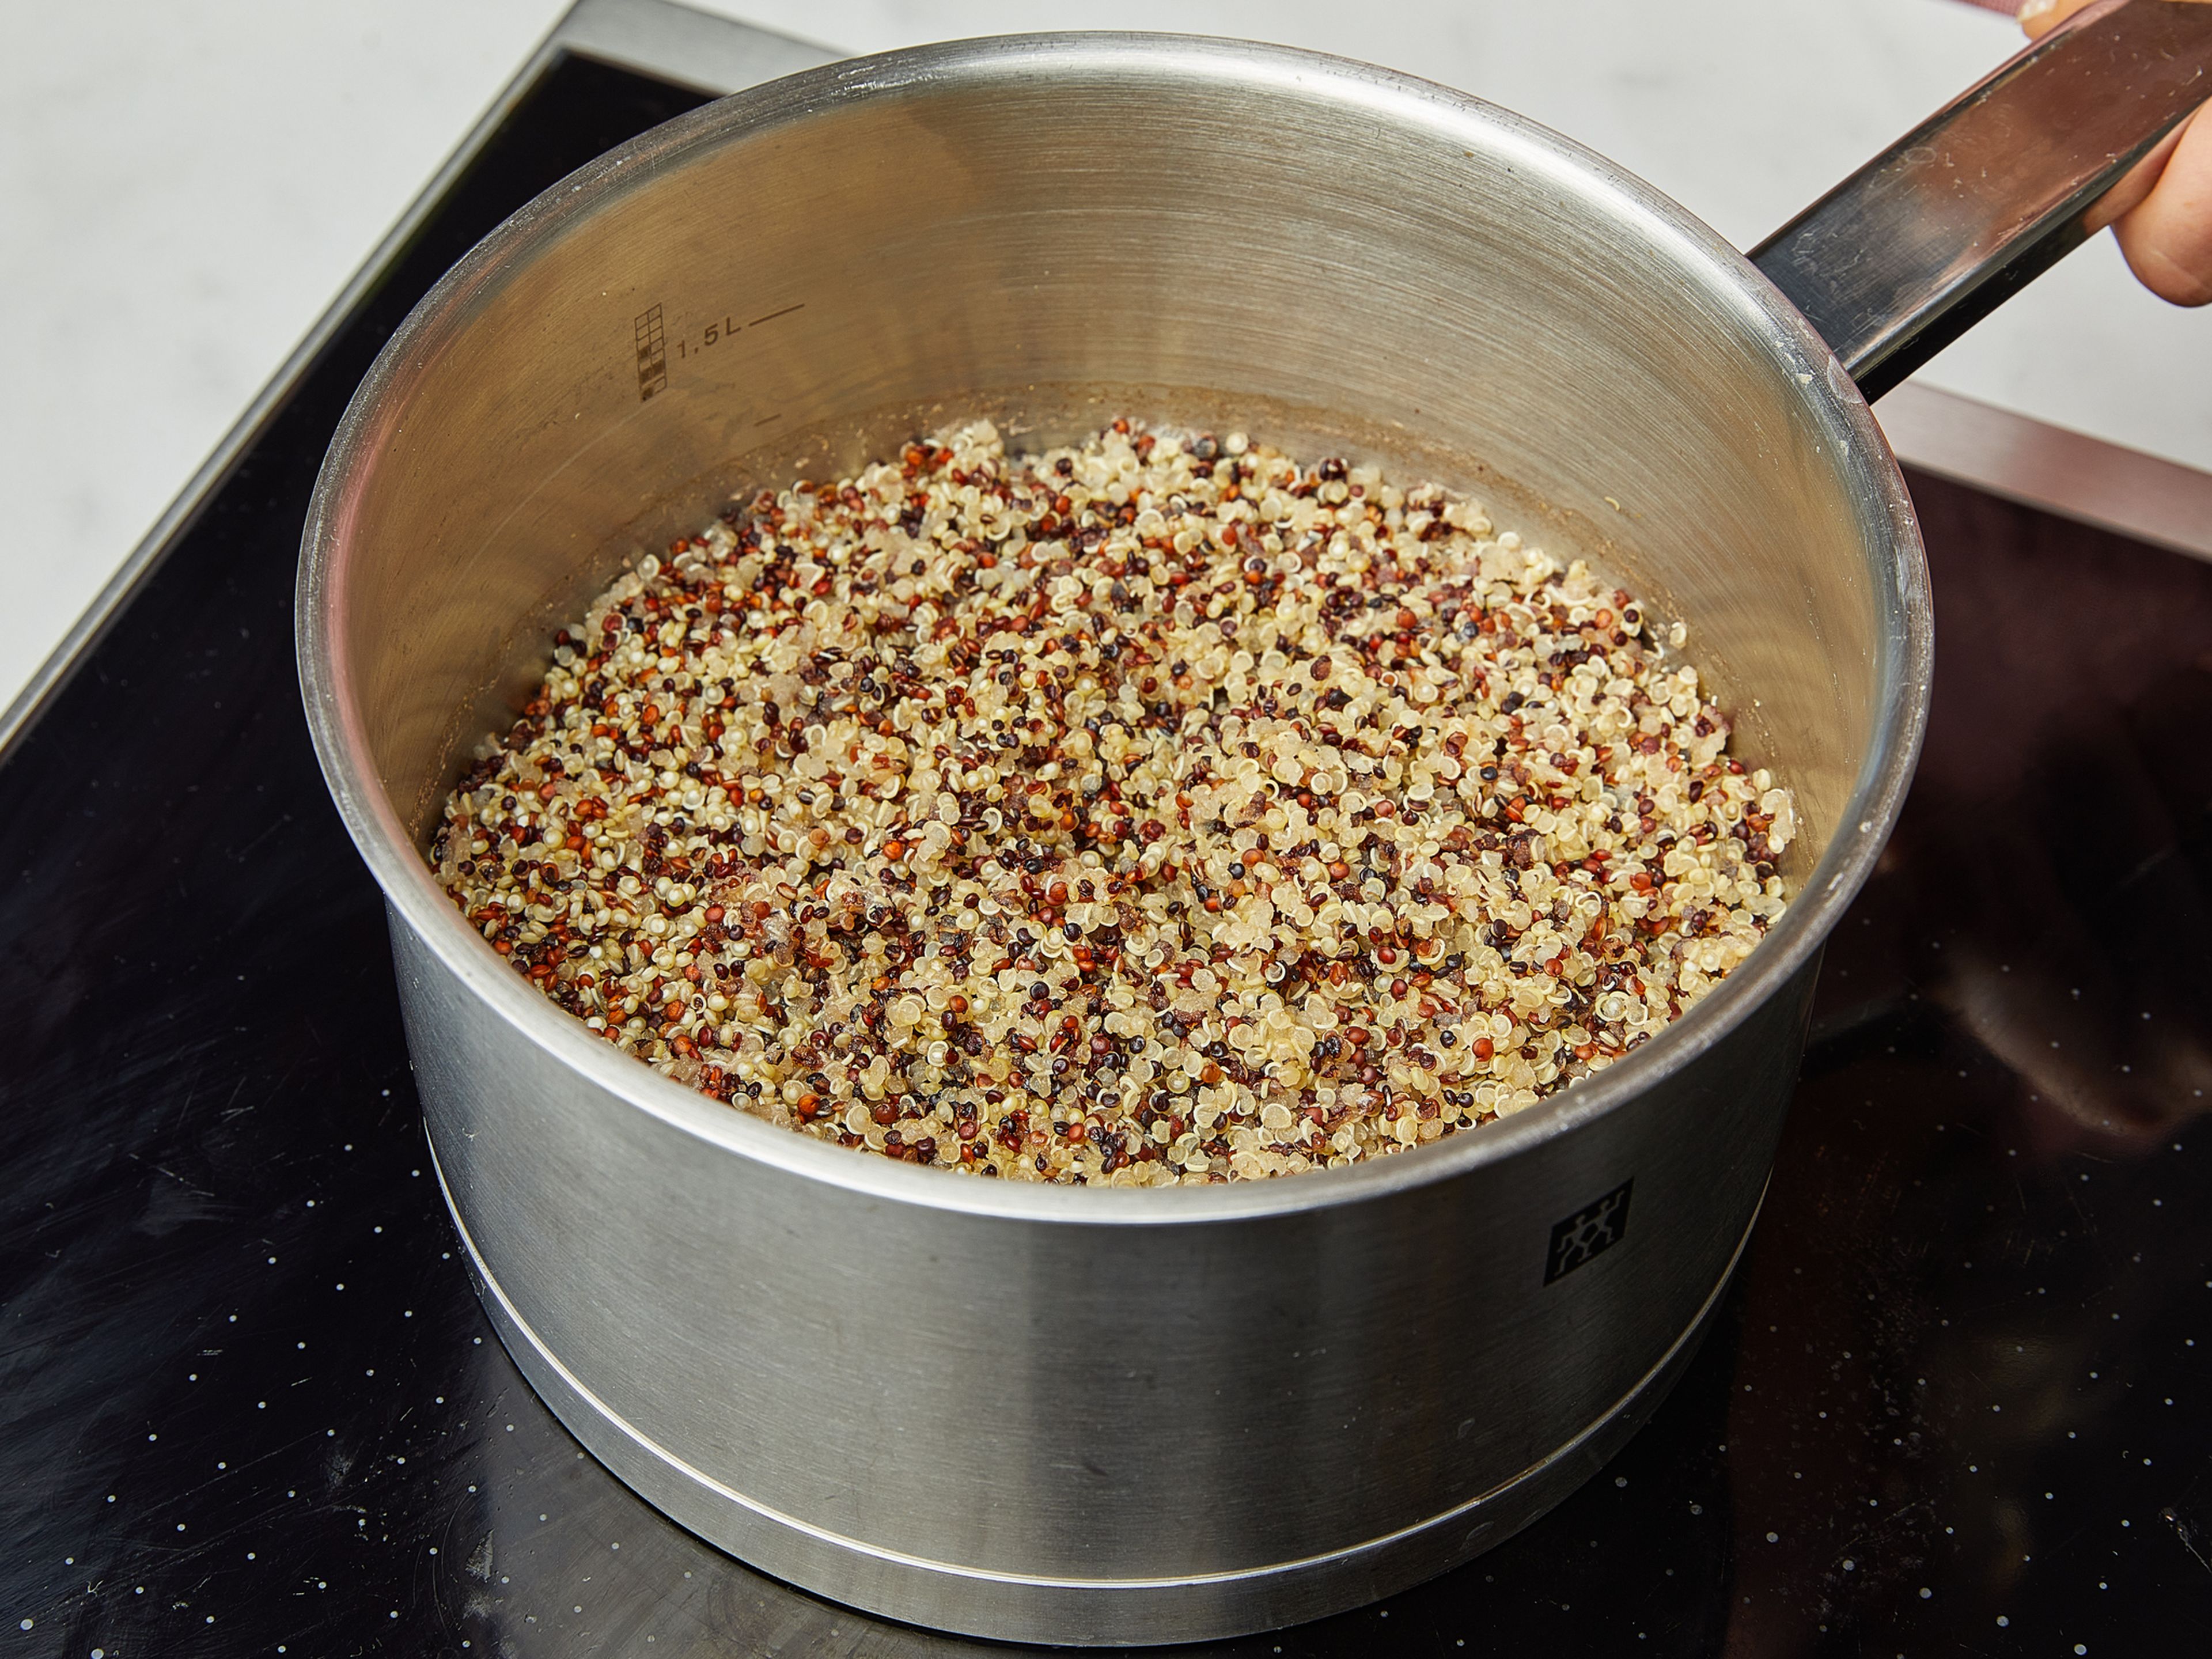 Rinse quinoa thoroughly and drain, cook according to the instructions, i.e. add quinoa to water, season with salt, bring to a boil and turn down the heat, keep at a bare simmer for about 20 min, until the quinoa is cooked and the water is absorbed.